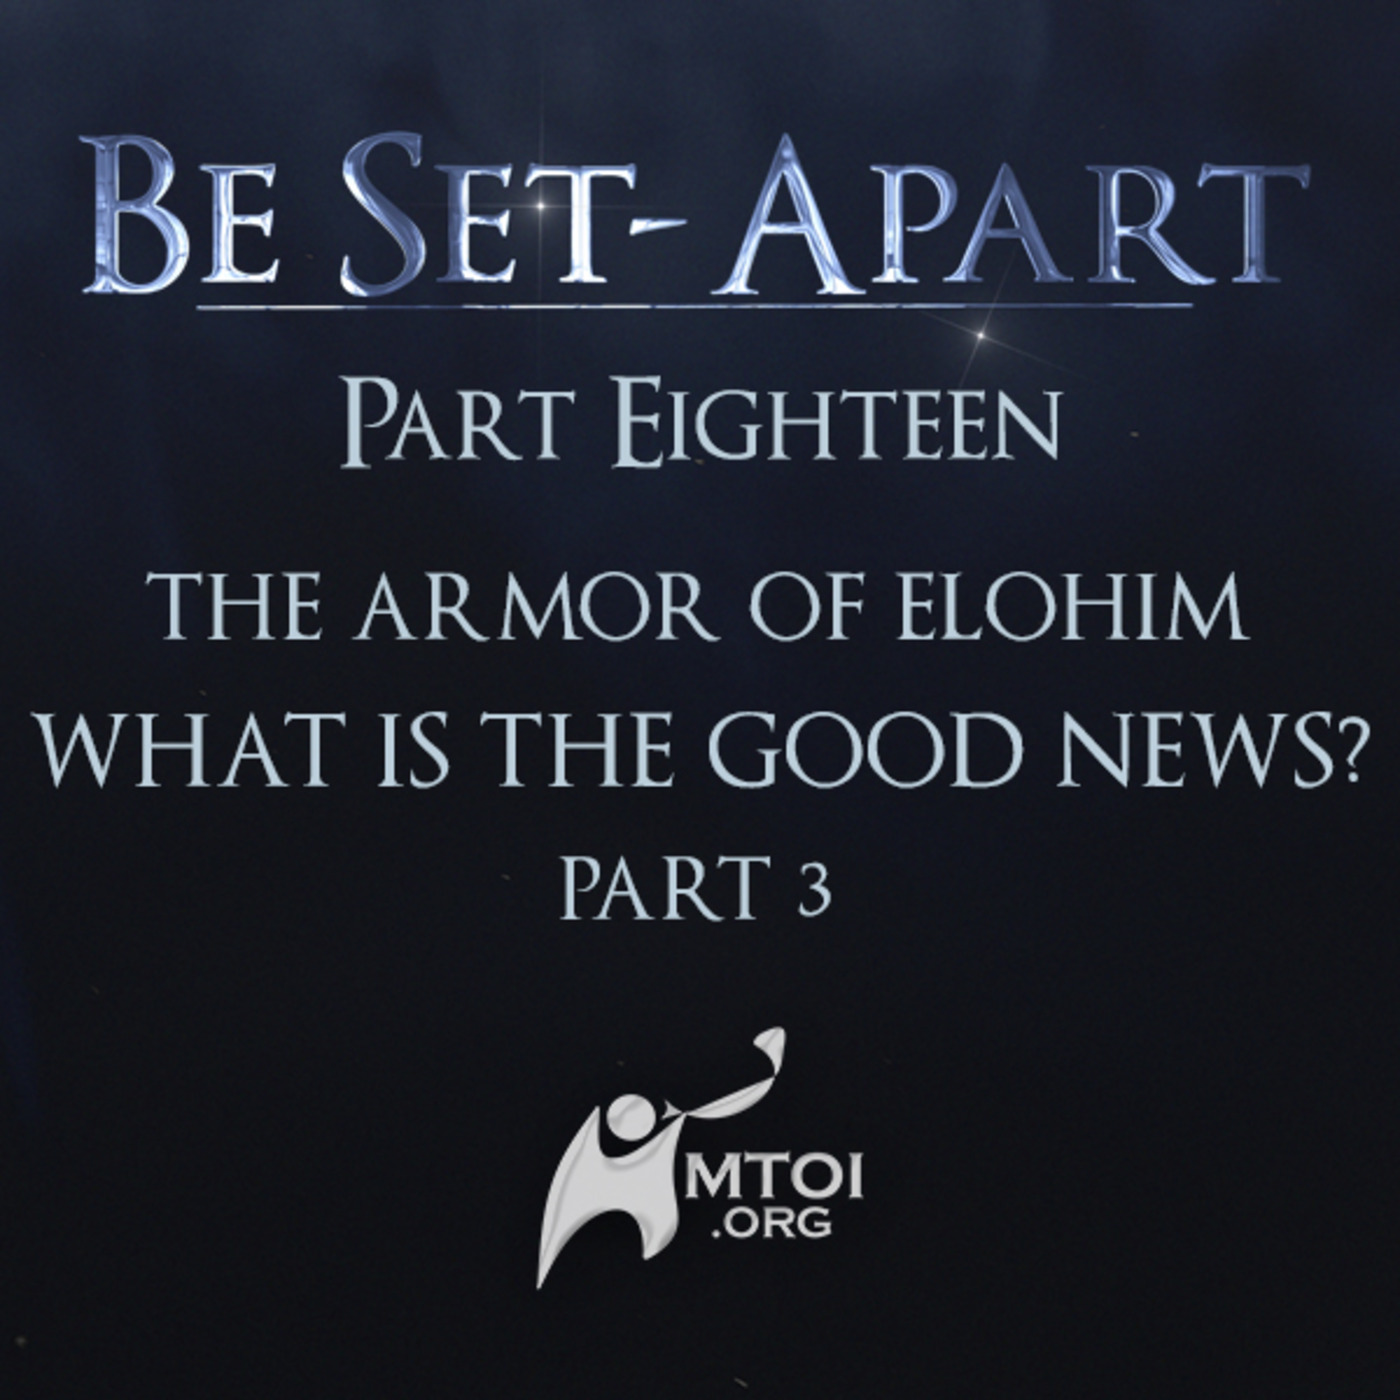 Episode 802: Be Set-Apart | Part Eighteen | The Armor of Elohim | What is the Good News? Part 3